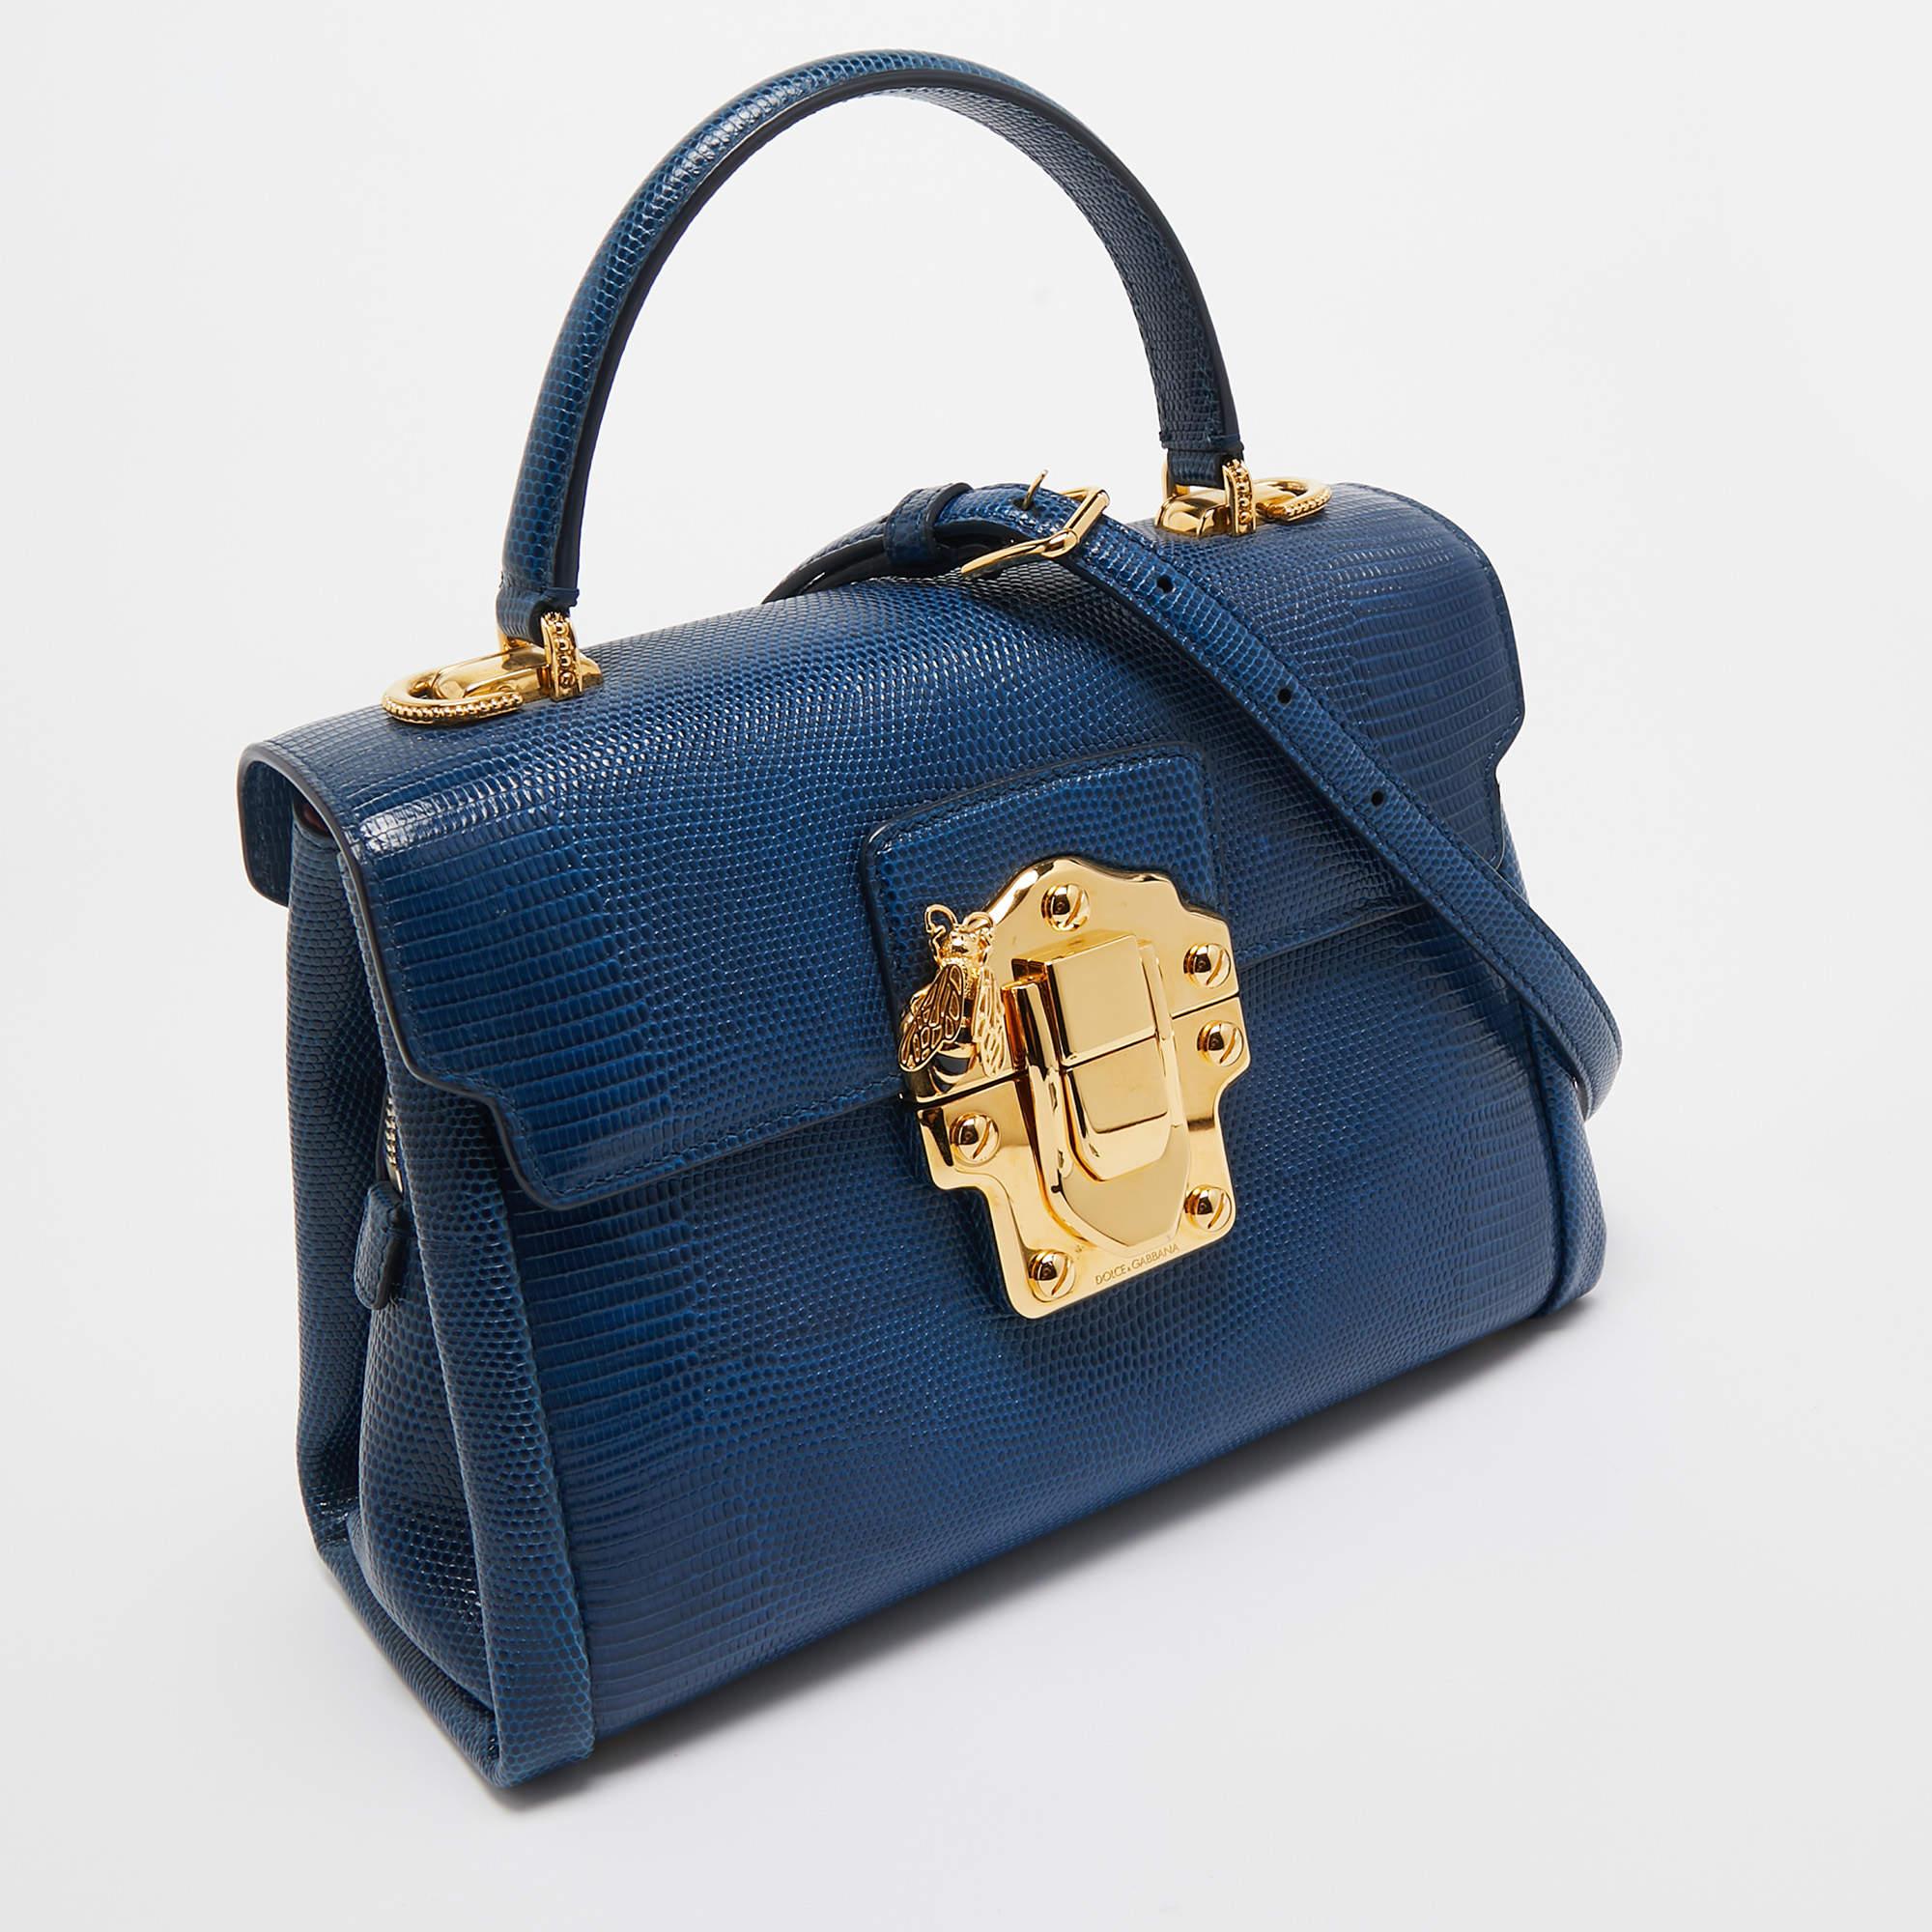 Dolce & Gabbana Blue Lizard Embossed Leather Lucia Top Handle Bag For Sale 7